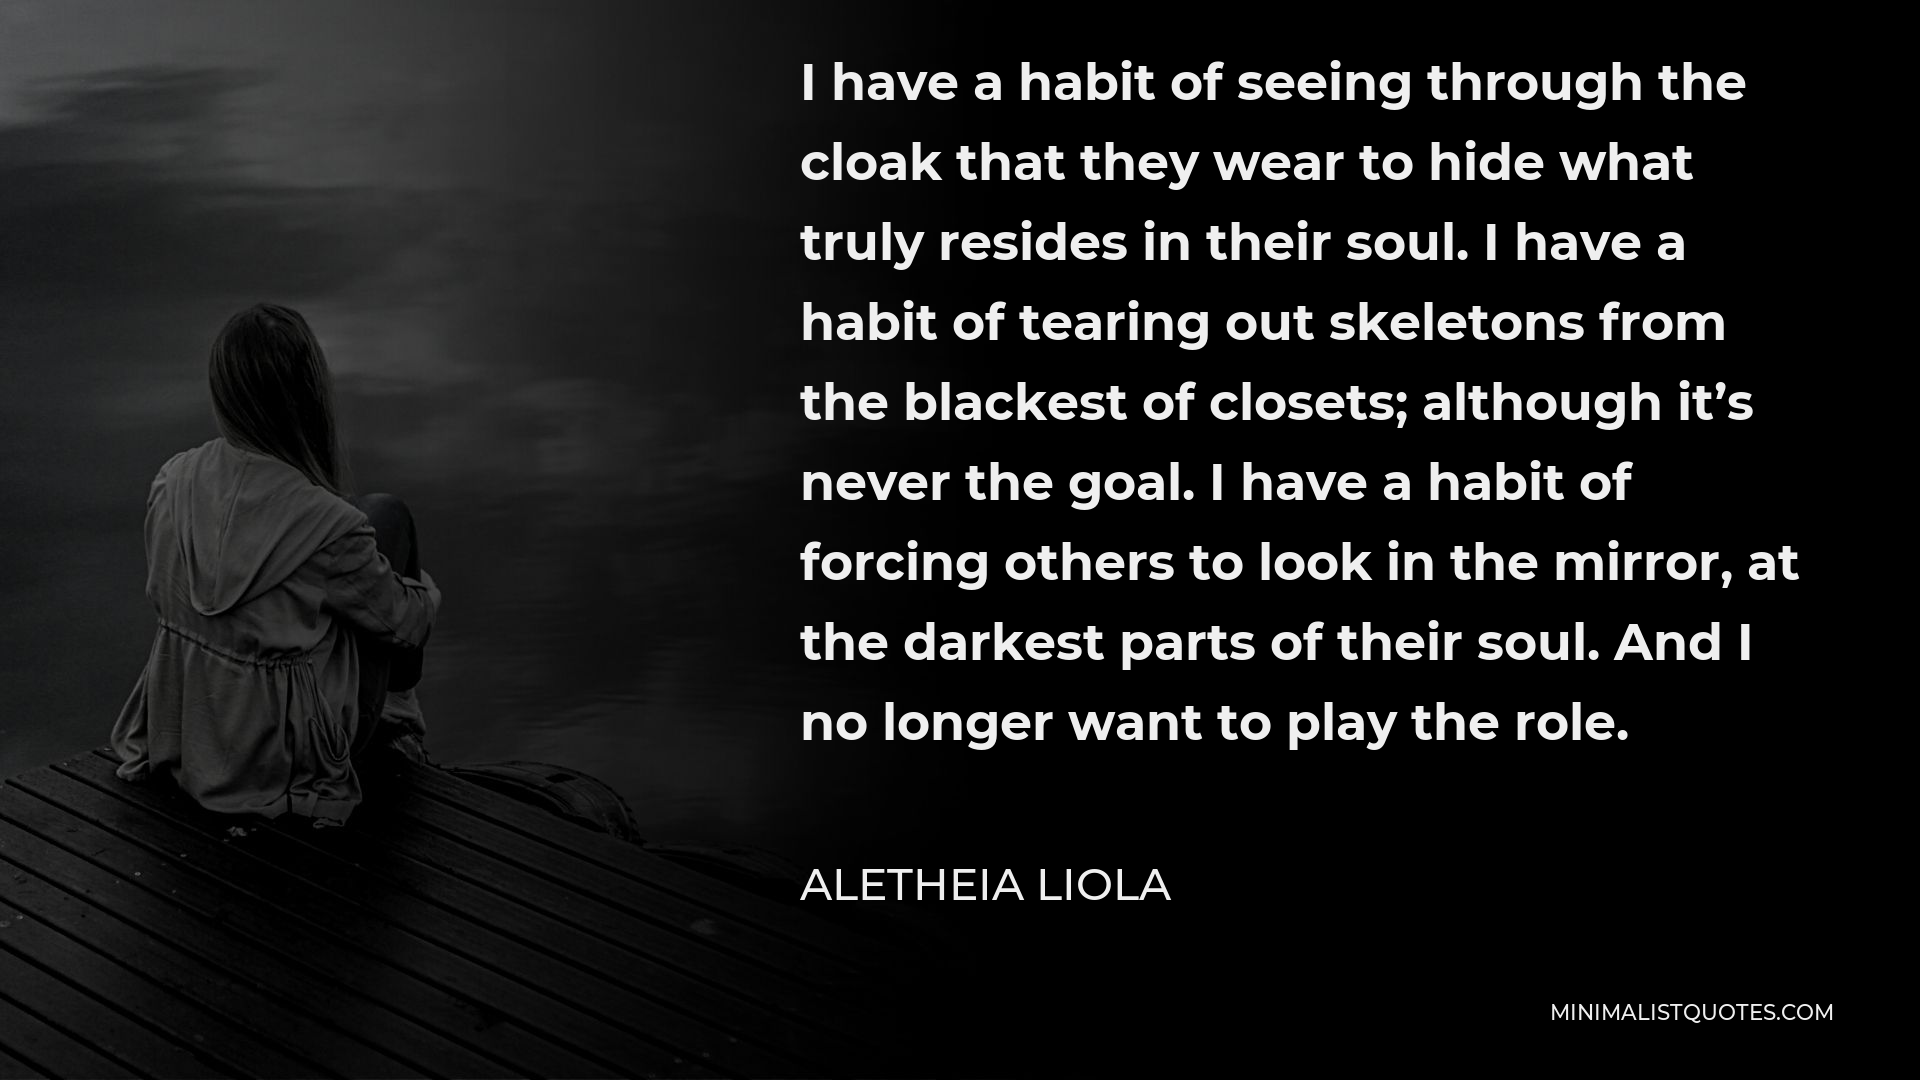 Aletheia Liola Quote - I have a habit of seeing through the cloak that they wear to hide what truly resides in their soul. I have a habit of tearing out skeletons from the blackest of closets; although it’s never the goal. I have a habit of forcing others to look in the mirror, at the darkest parts of their soul. And I no longer want to play the role.